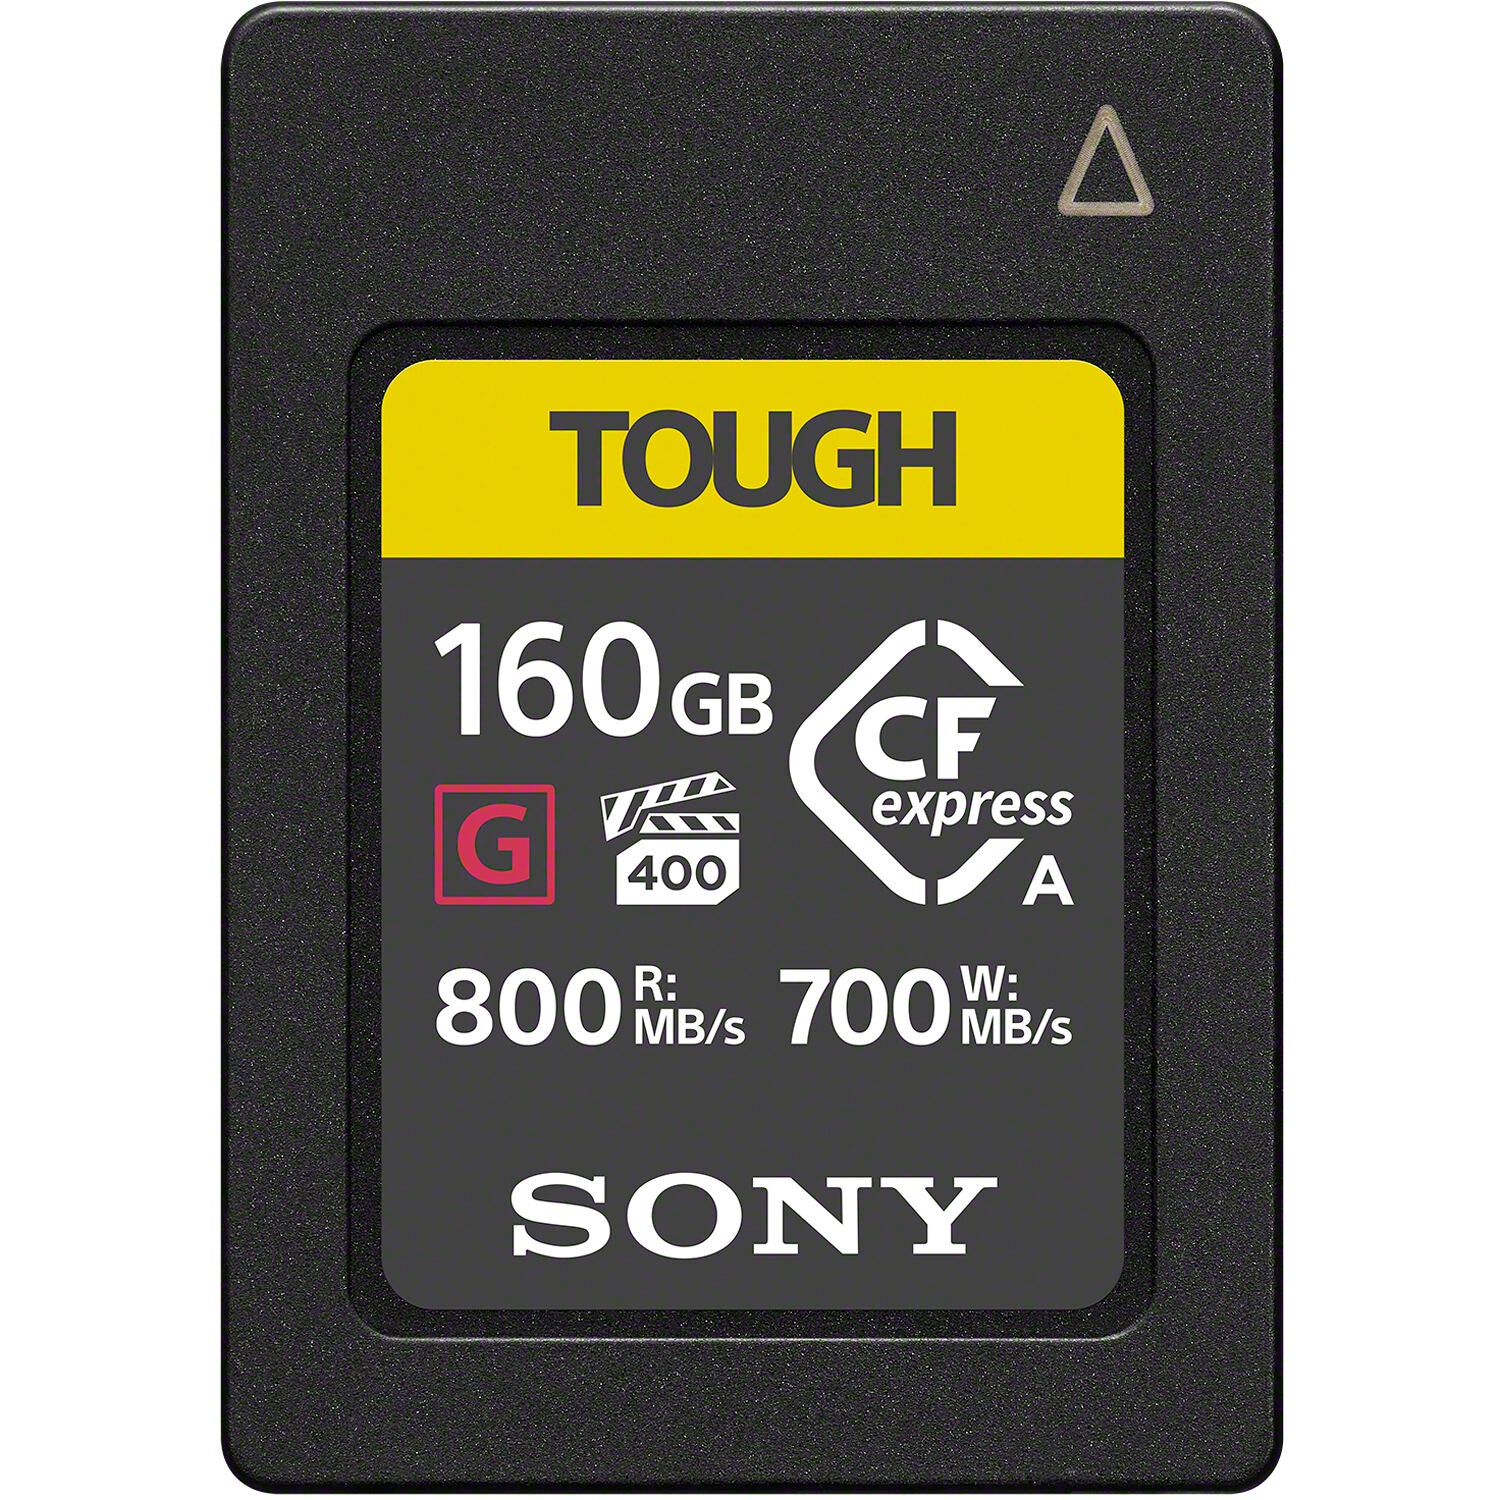 CFexpress Type A G-Series Memory Card - 160GB